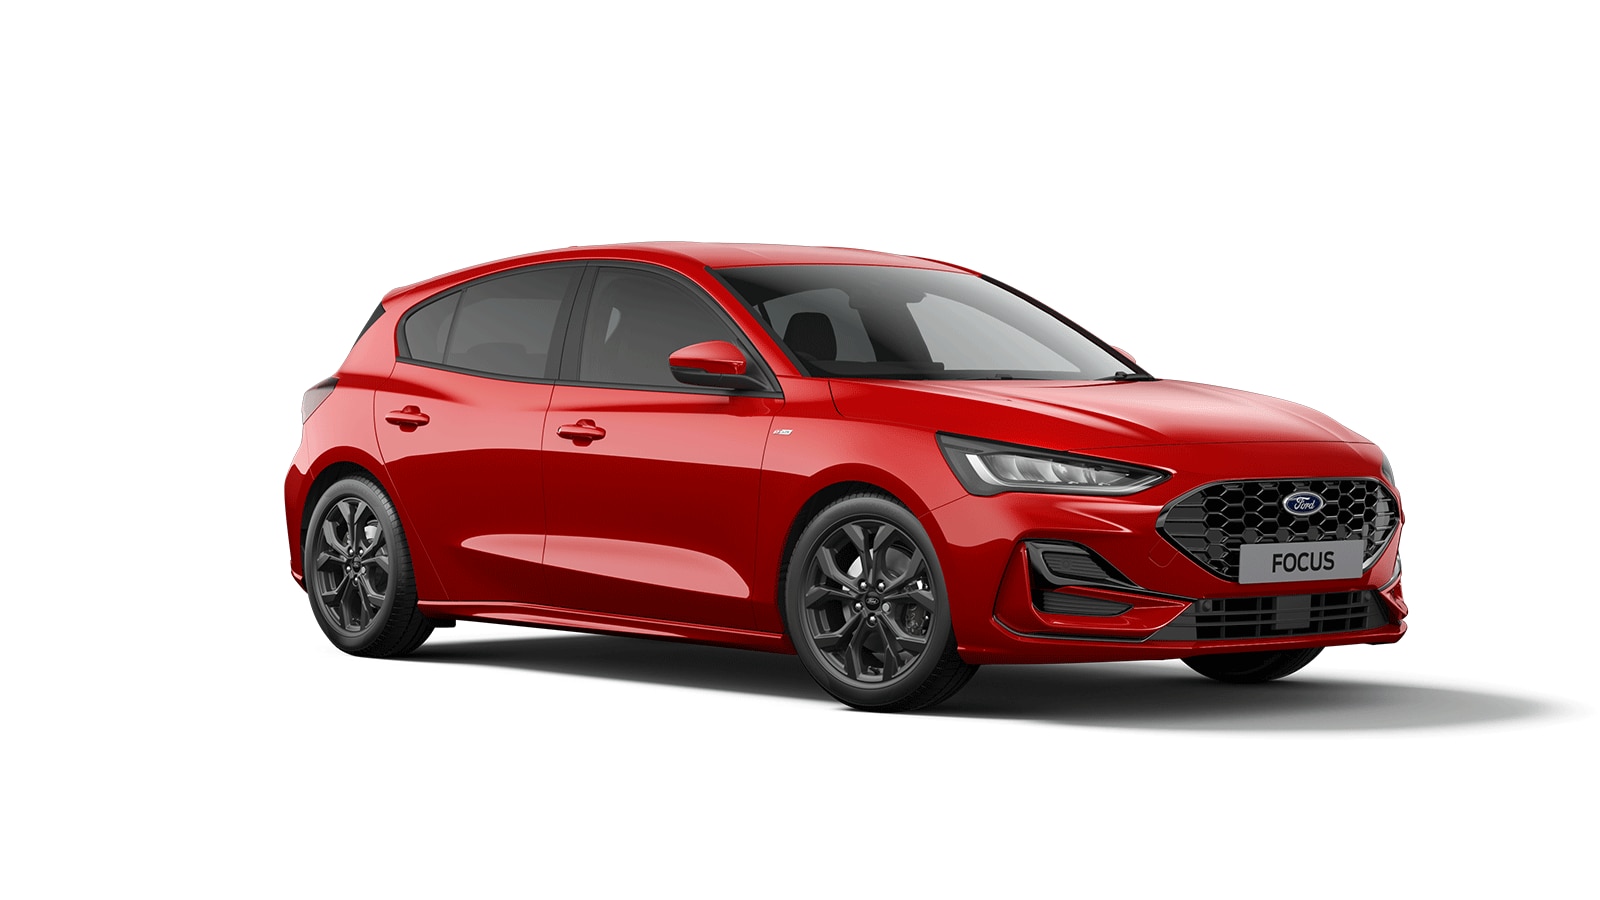 New Ford Focus ST-Line Style 1.5L EcoBlue 120PS at RGR Garages